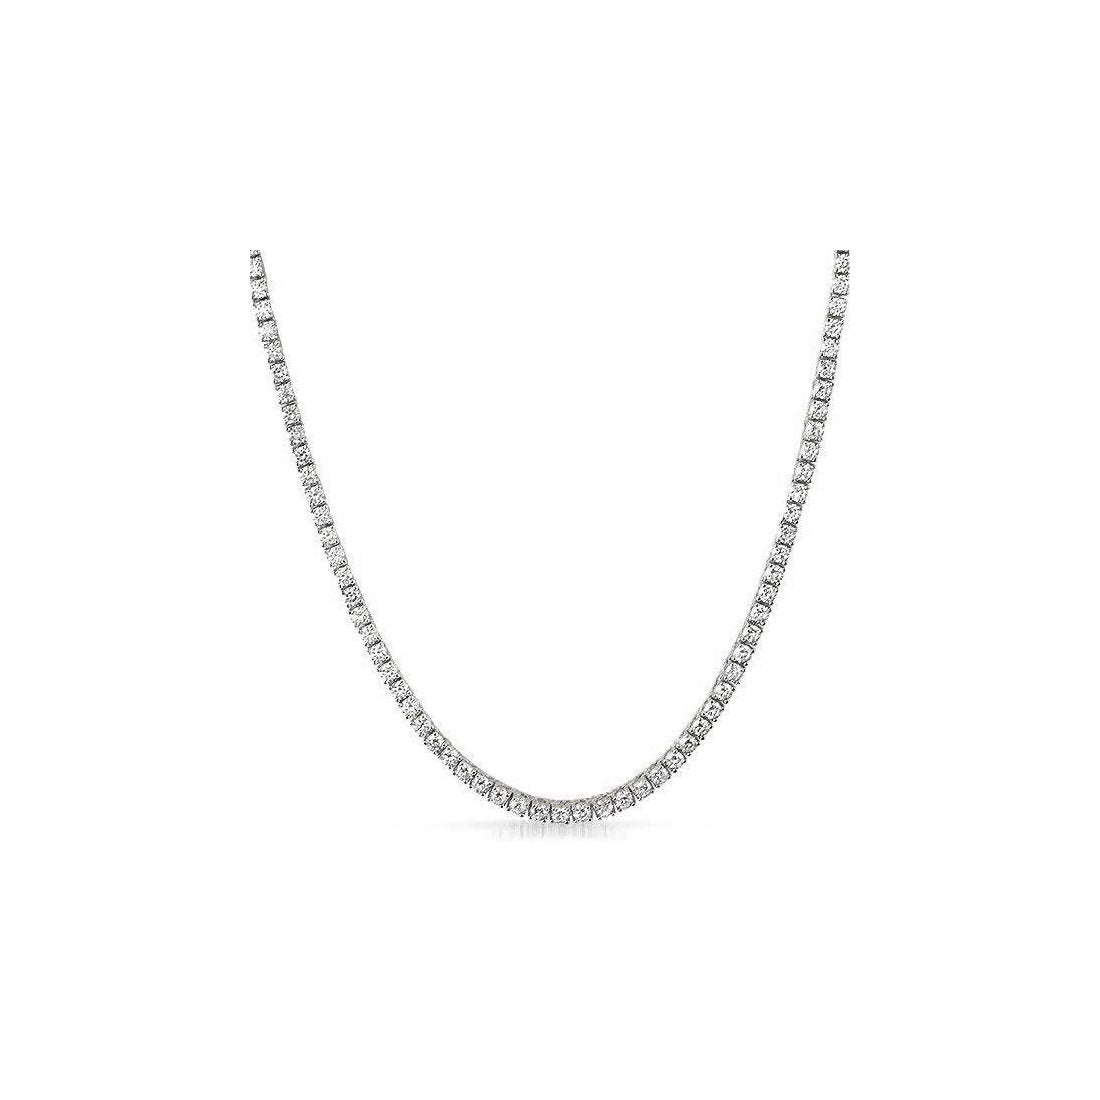 3MM CZ Tennis Necklaces .925 Sterling Silver Length "17 to 30" Inches